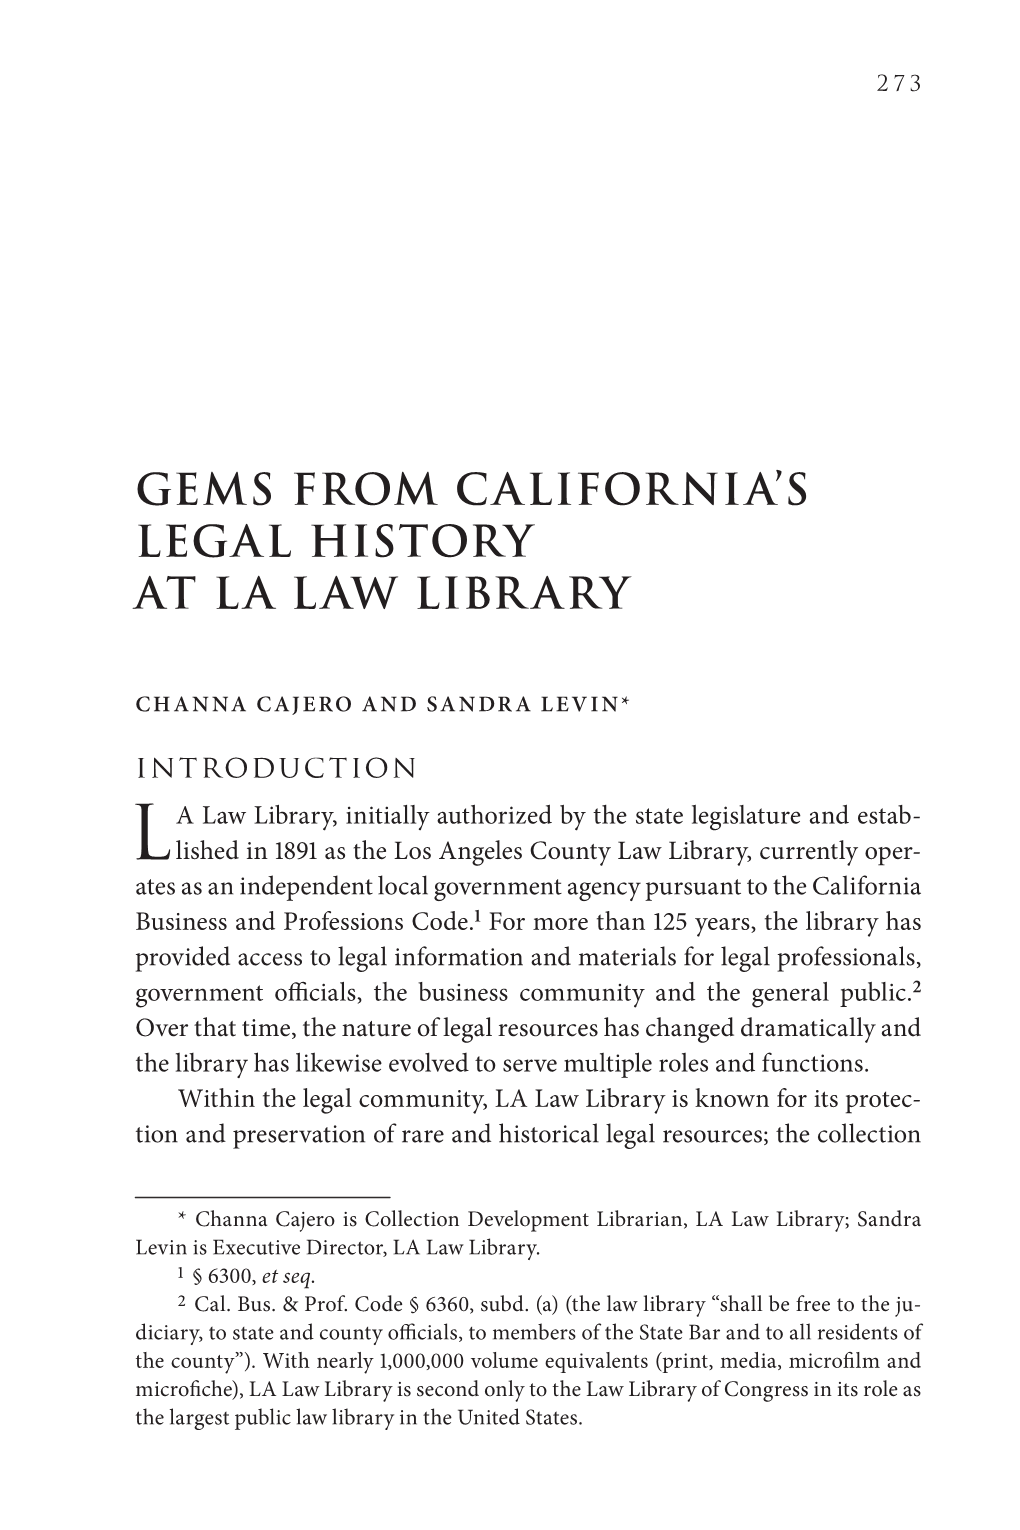 Gems from California's Legal History at La Law Library